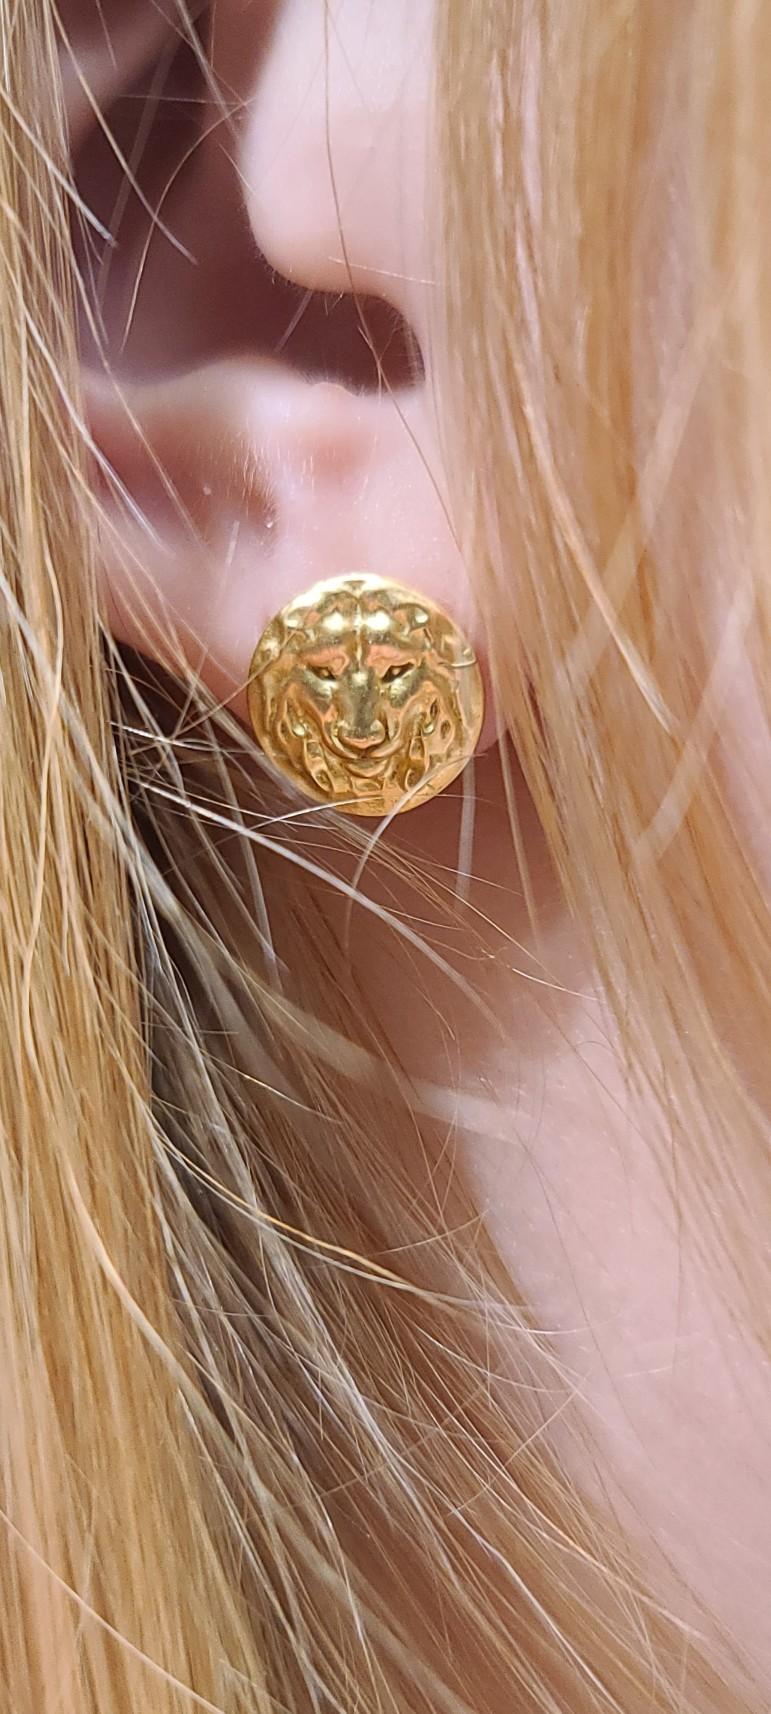 18 Karat Pink Gold Lion Pierced Earrings, The king of the jungle made especially for the ears now! Absolutely fearless.  Can you hear the roar? It's so close to your ear now , I bet you could.  Polished. 11.5 mm diameter./ or 3/8th inch  Made to